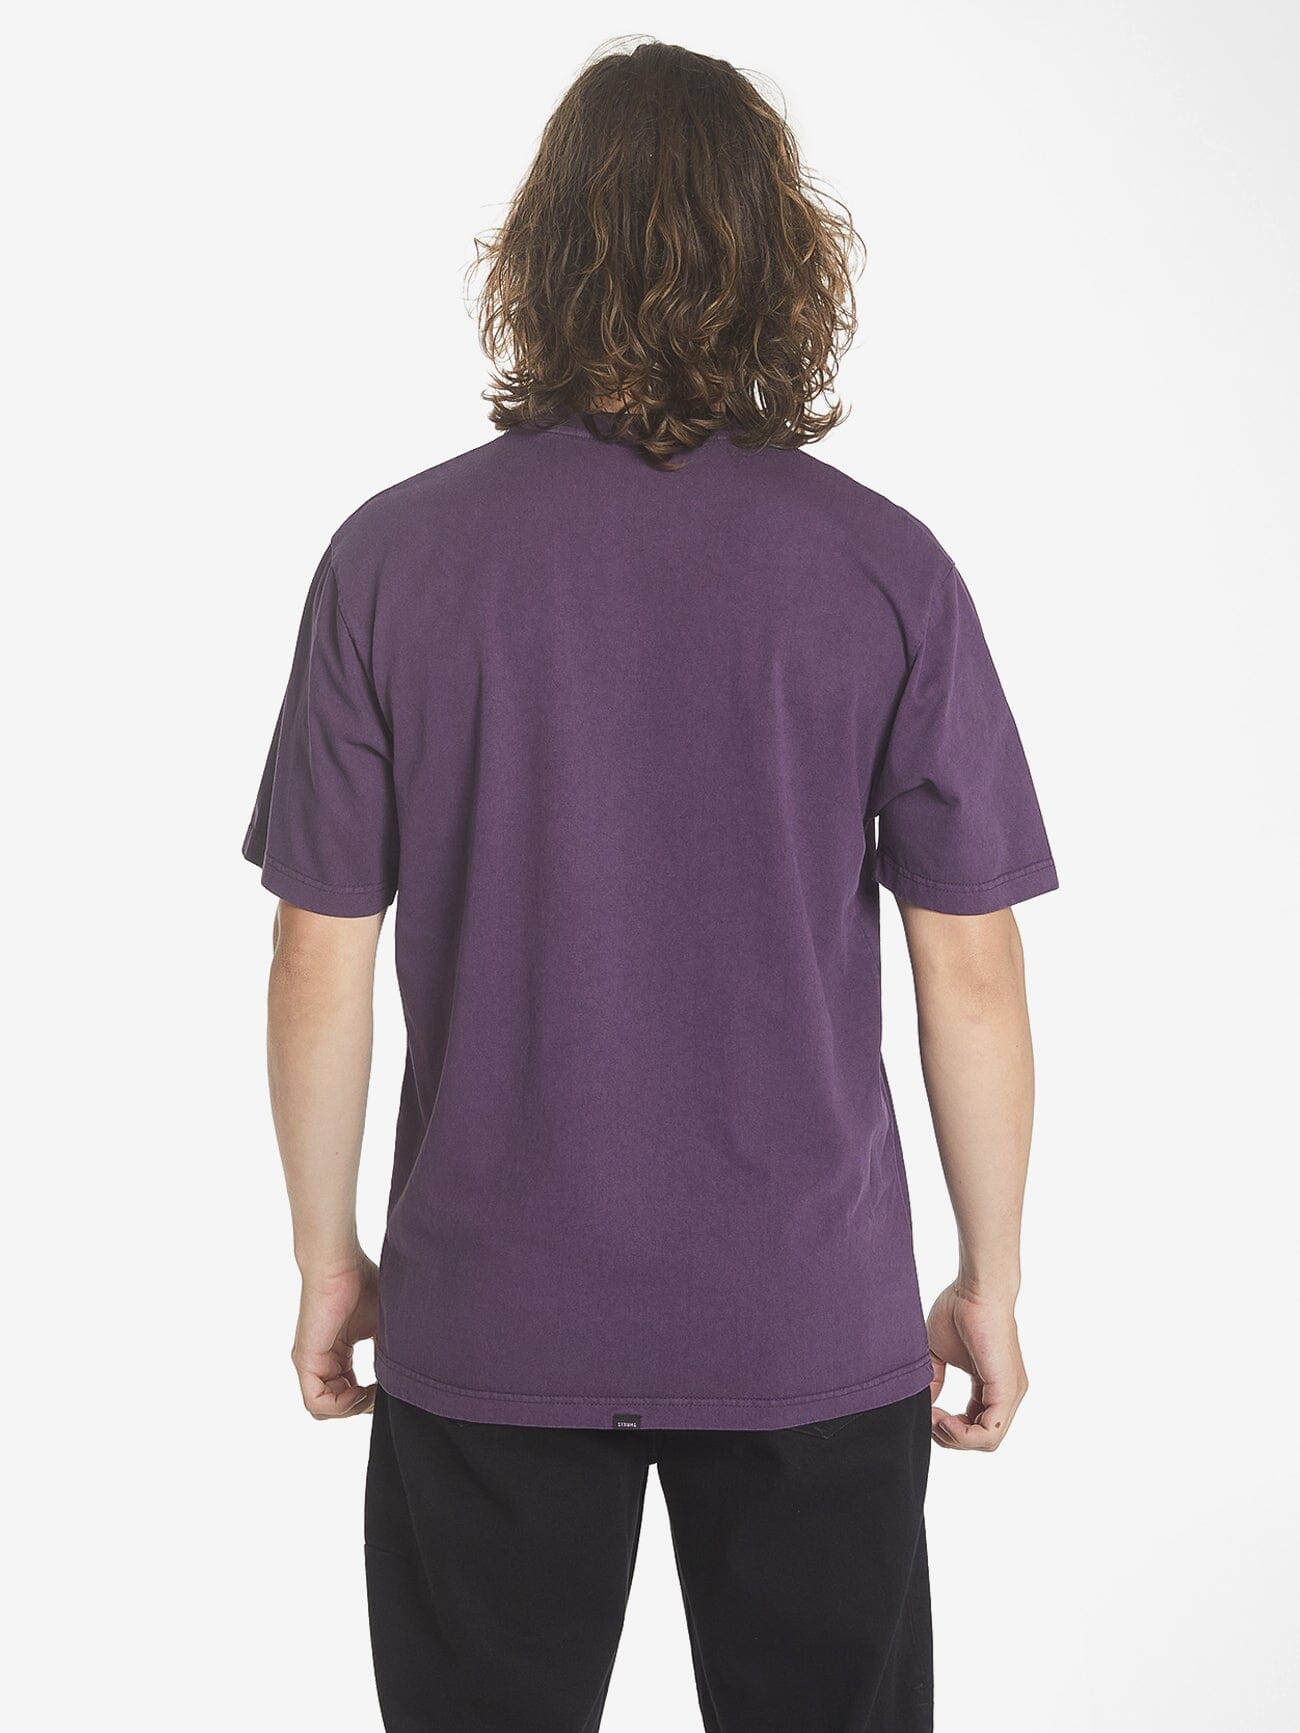 Professional Peace Oversize Fit Tee - Purple Pennant XS